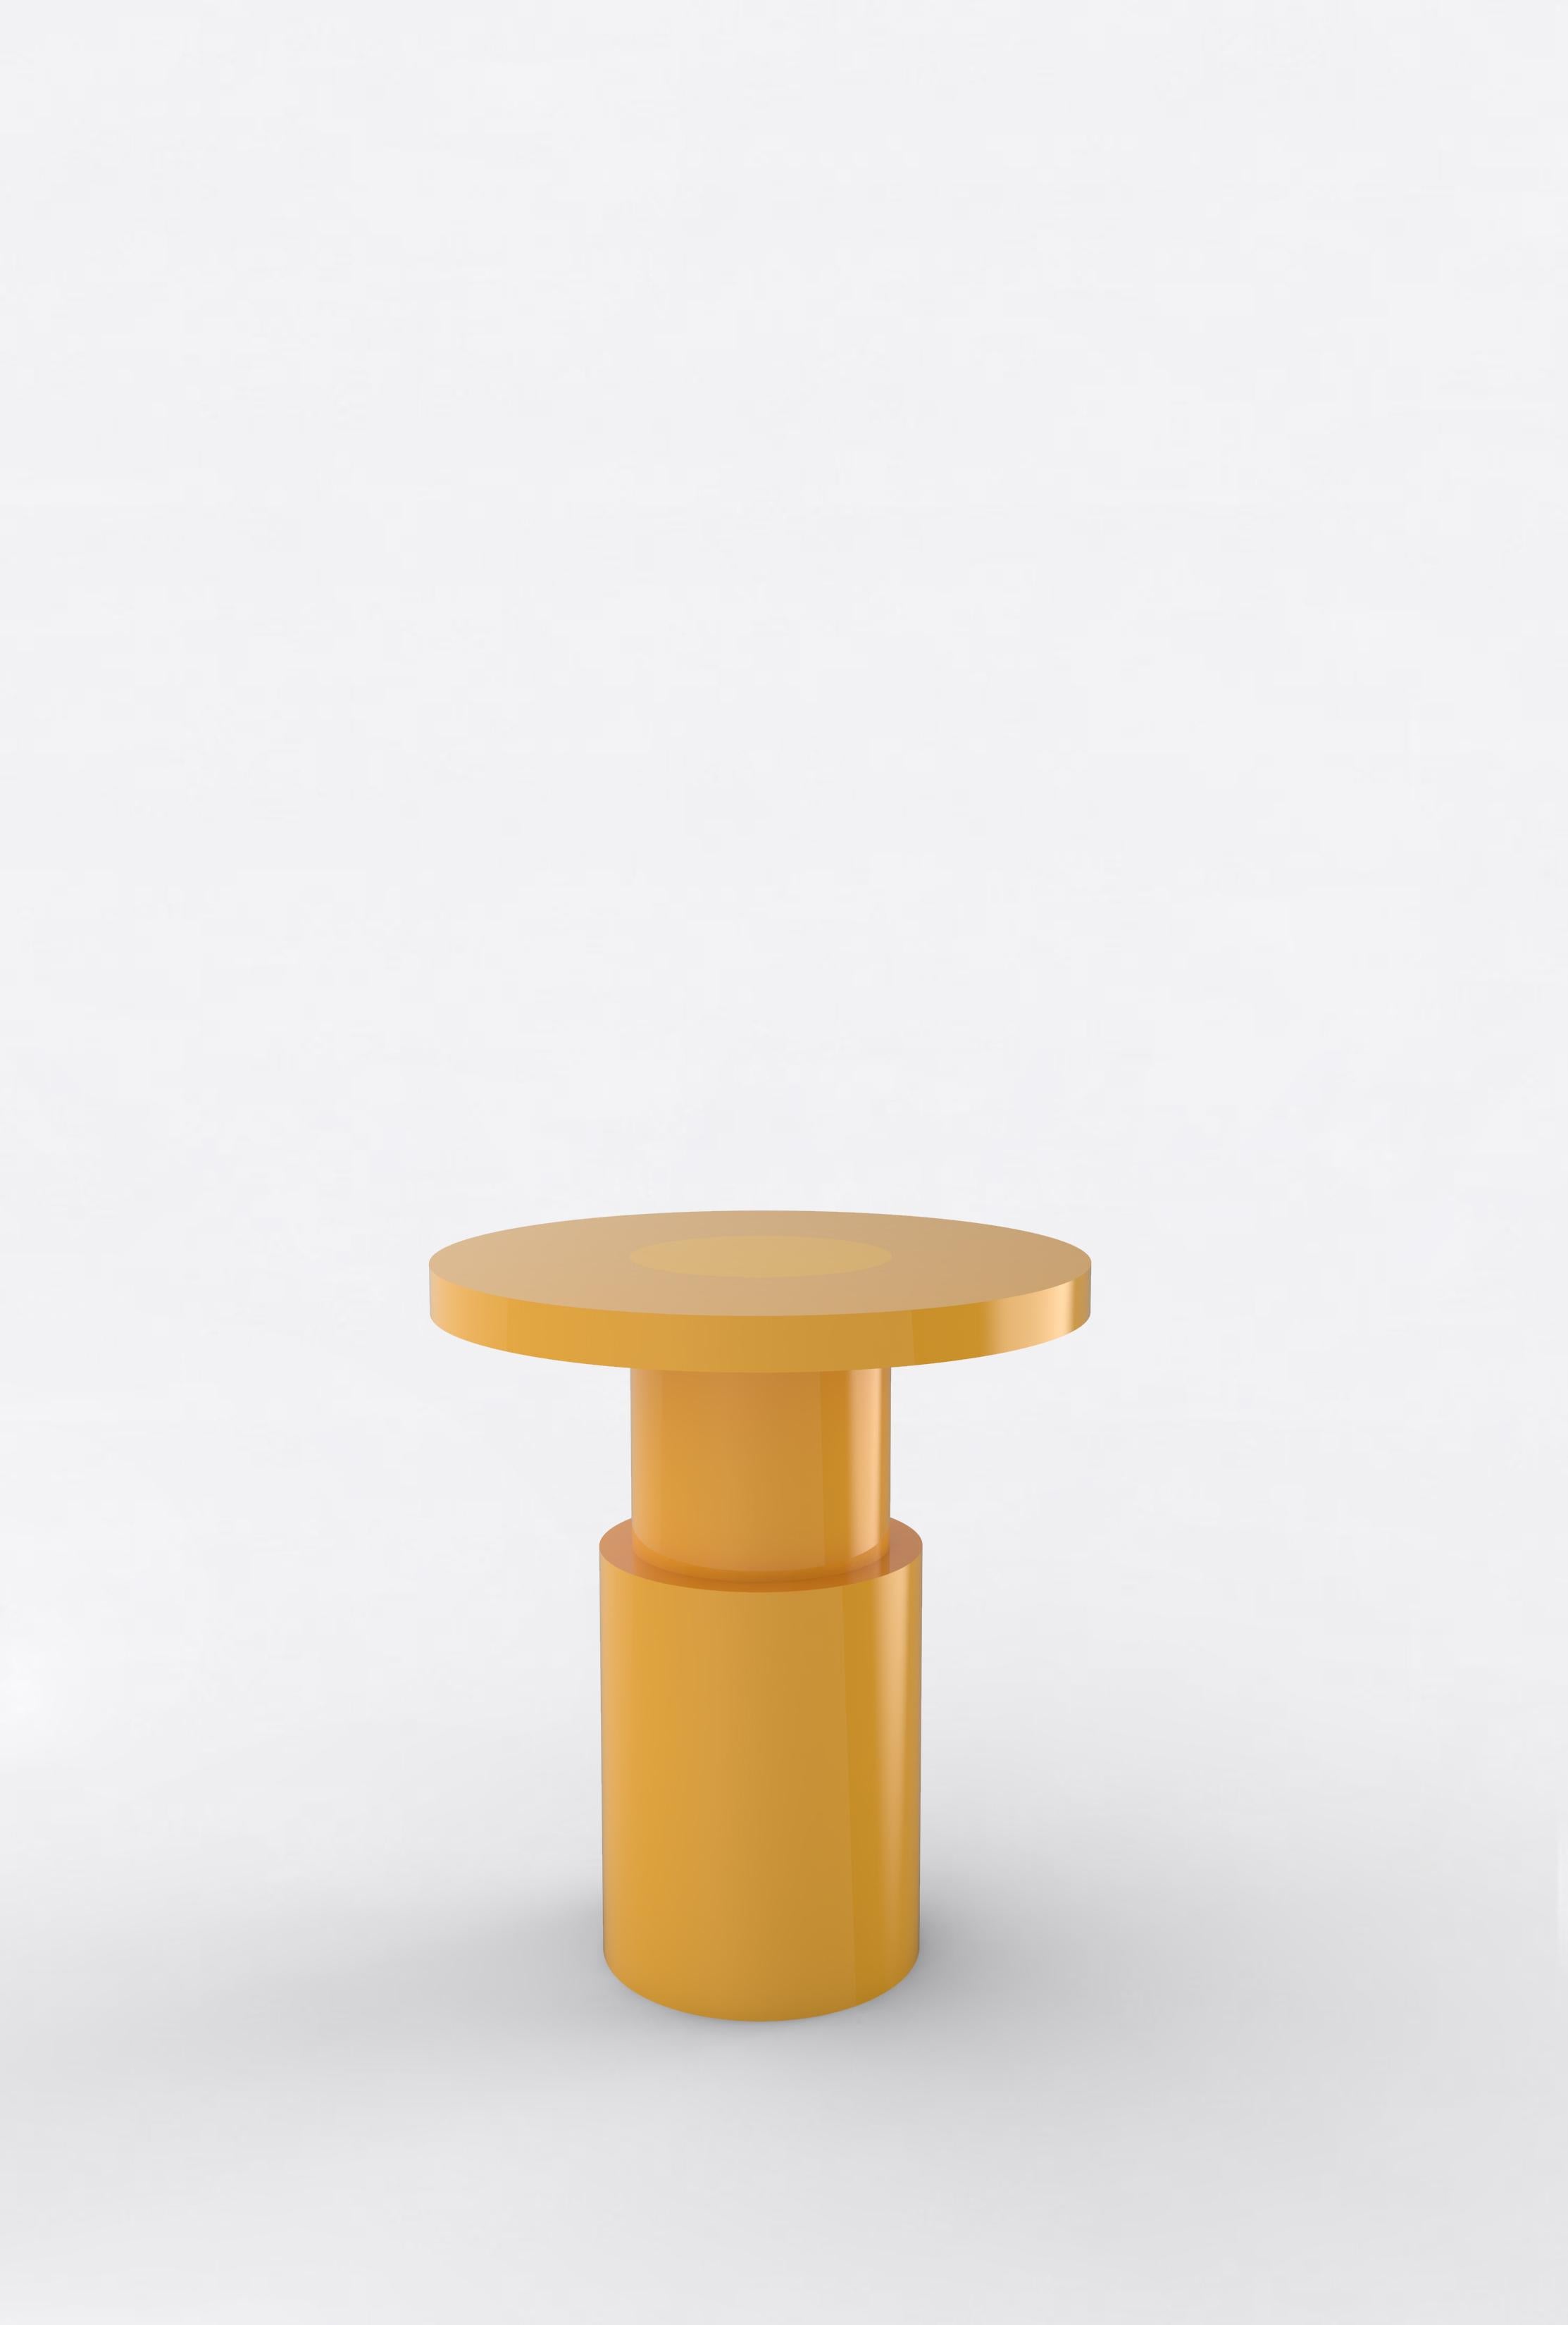 Orphan Work 105C End Table, 2020
Shown painted
Available with painted top and base
Colors available: pink, mint, yellow, blue and brown.
Measures: 20” diameter x 22” height

Custom colors available by request.
Additional dimensions, materials